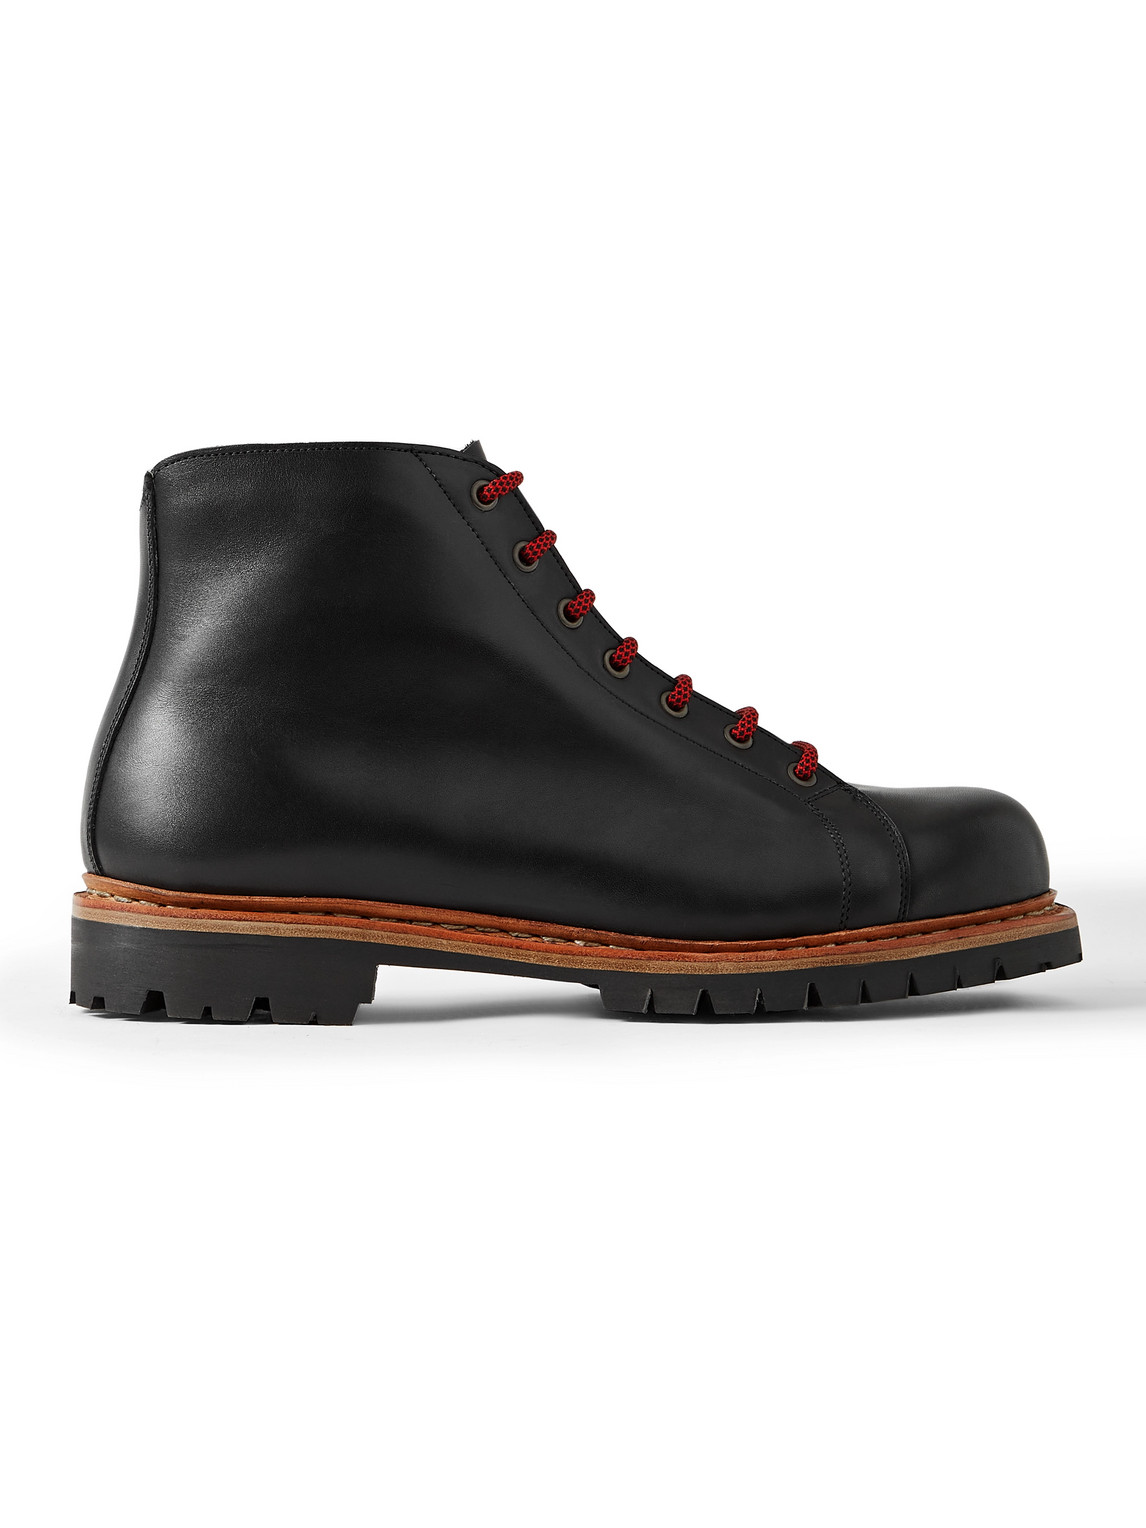 Edmund Shearling-Lined Leather Boots